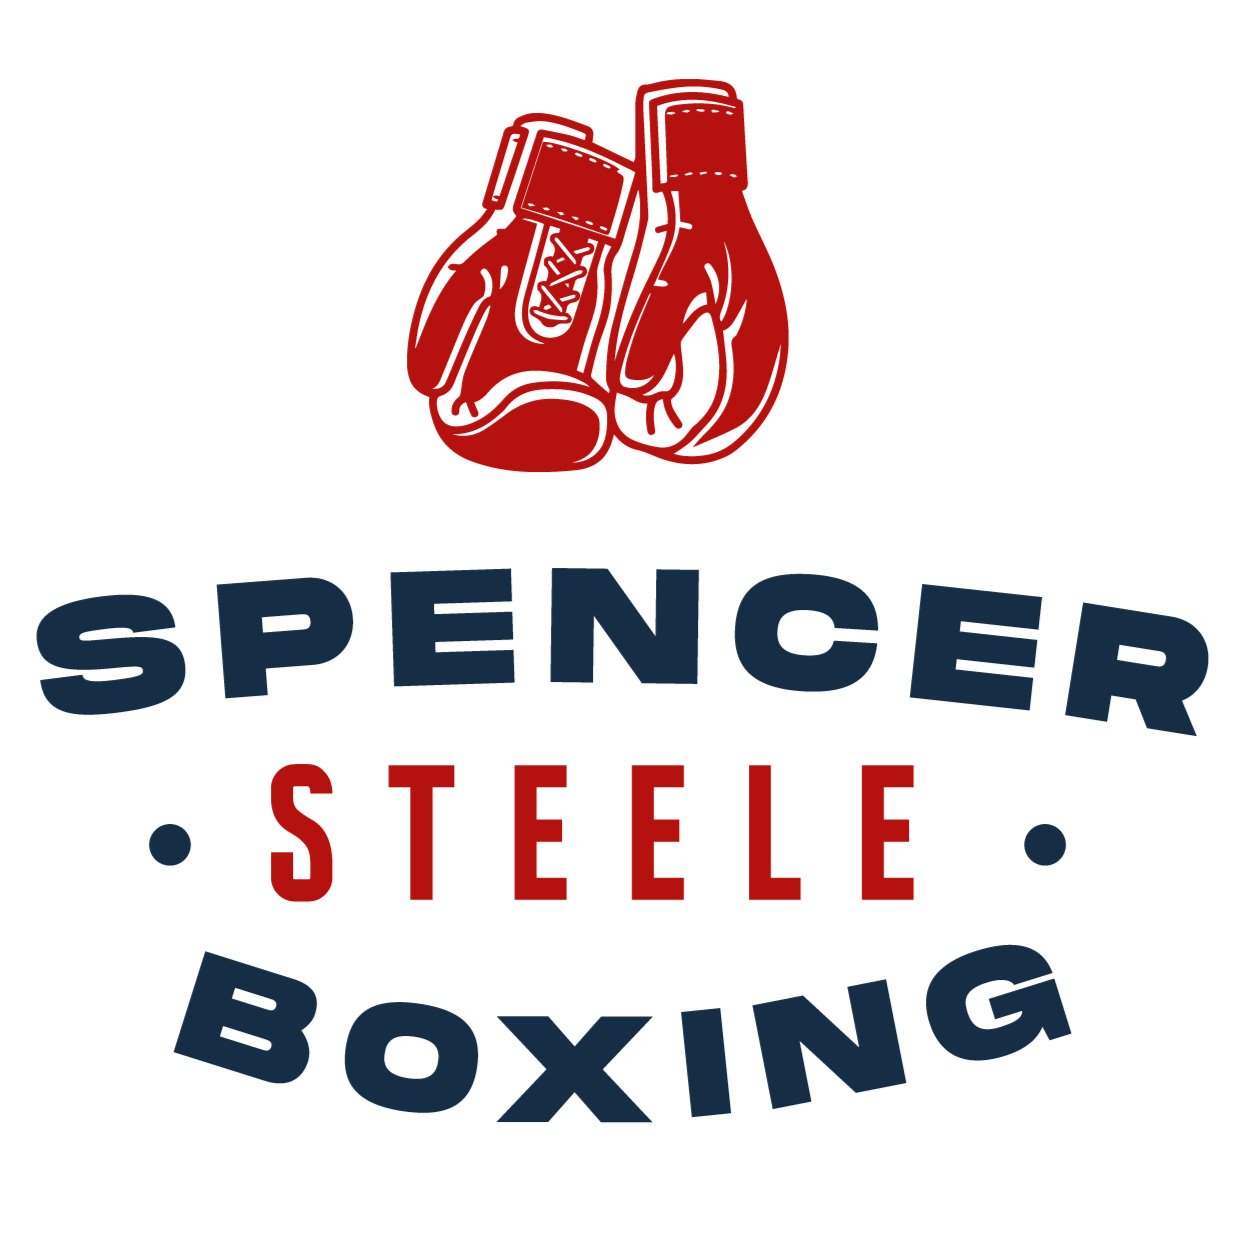 Spencer Steele Boxing